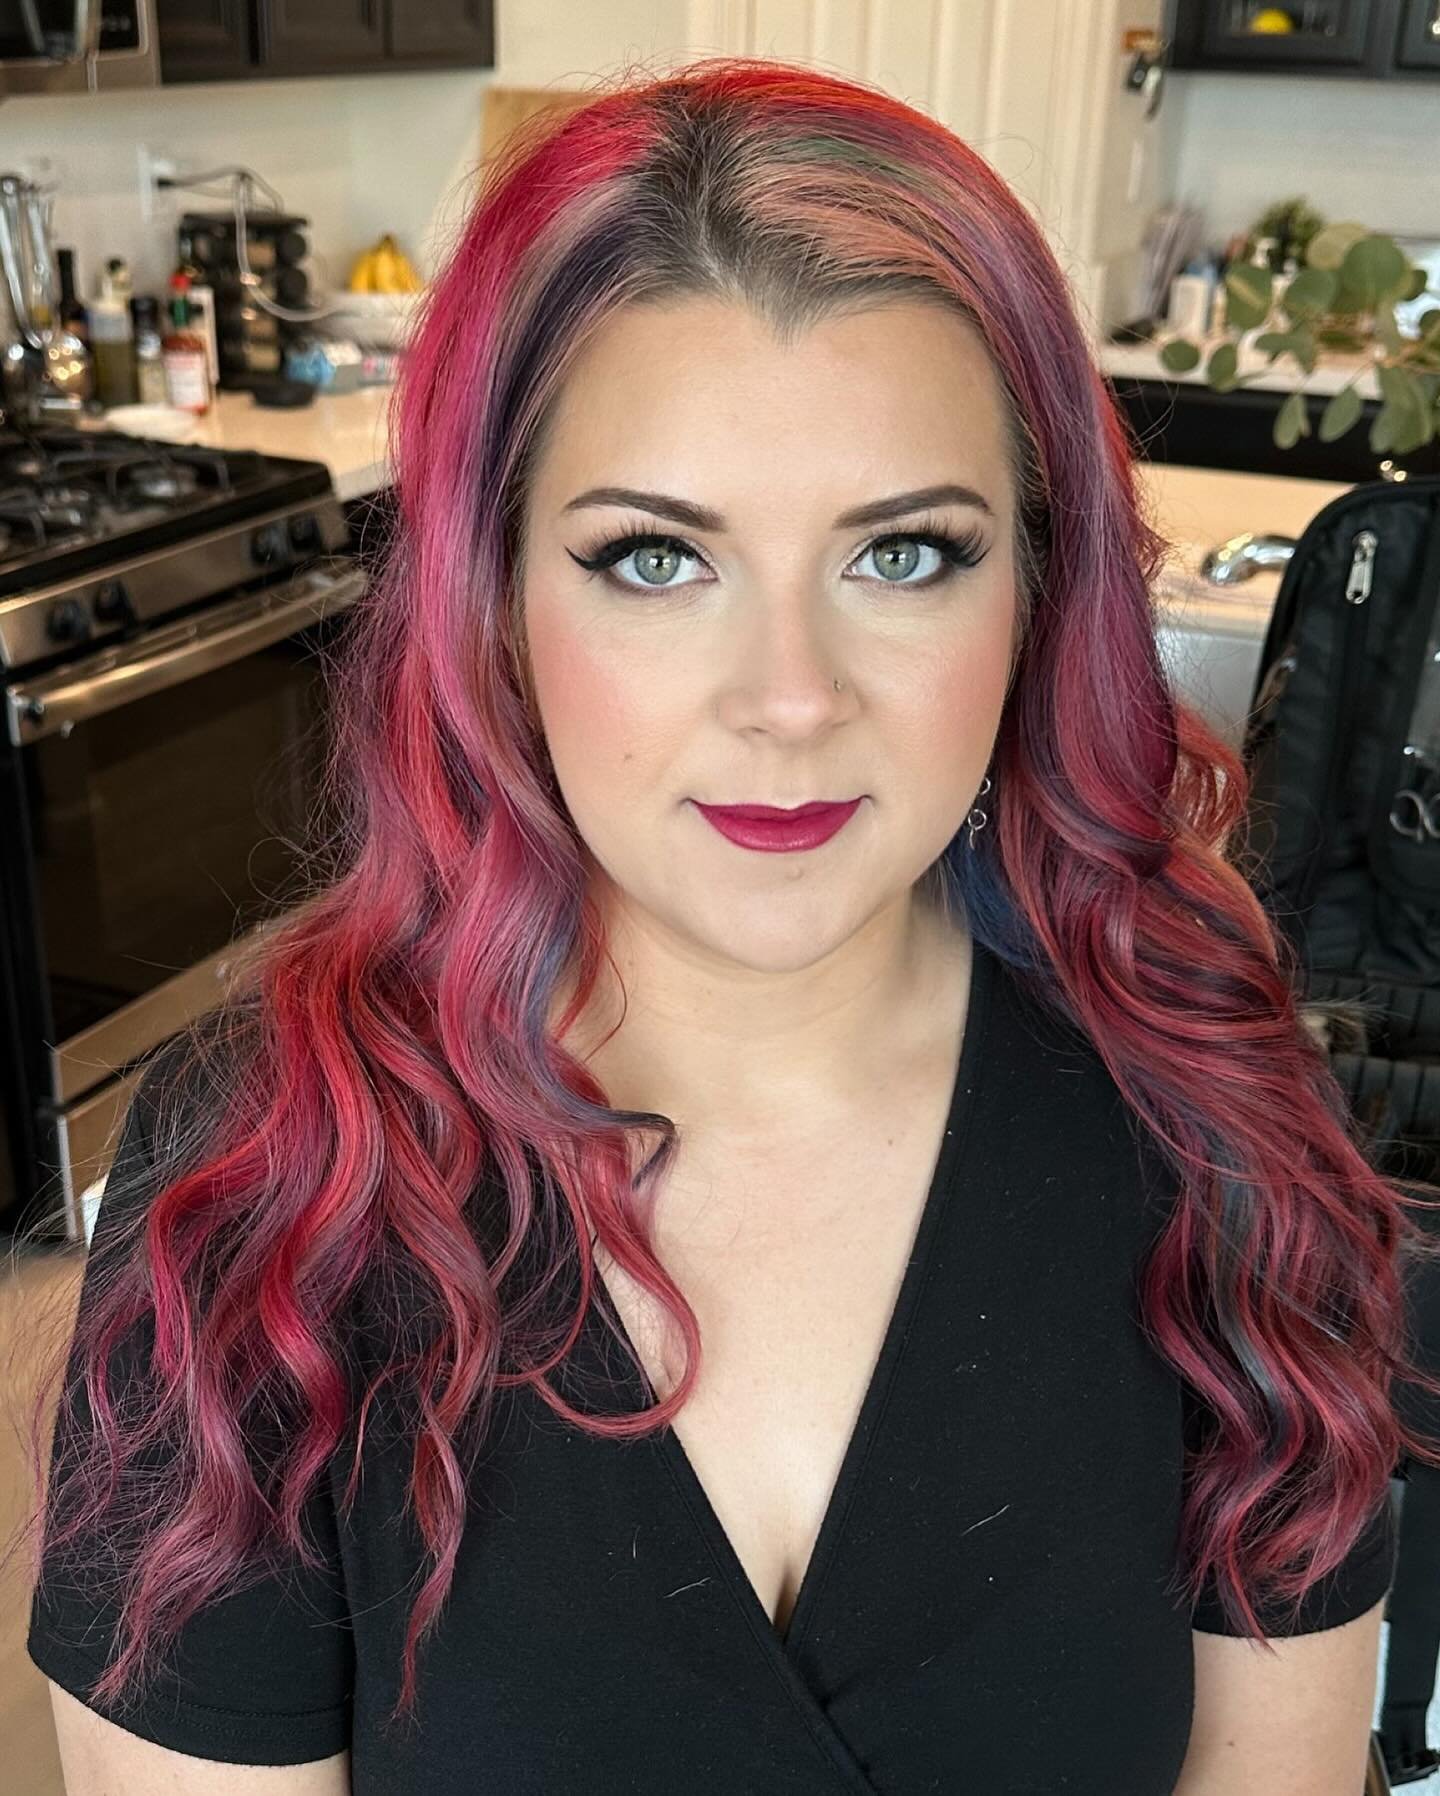 Makeup and hair today on a lovely boudoir client for @boudoirbyallisonpheleita &hellip; absolutely loved working with you both today and go follow her for amazing boudoir! #boudoir #photography #mua #hmua #hairstyling #rainbowhair #pinup #pinupmakeup